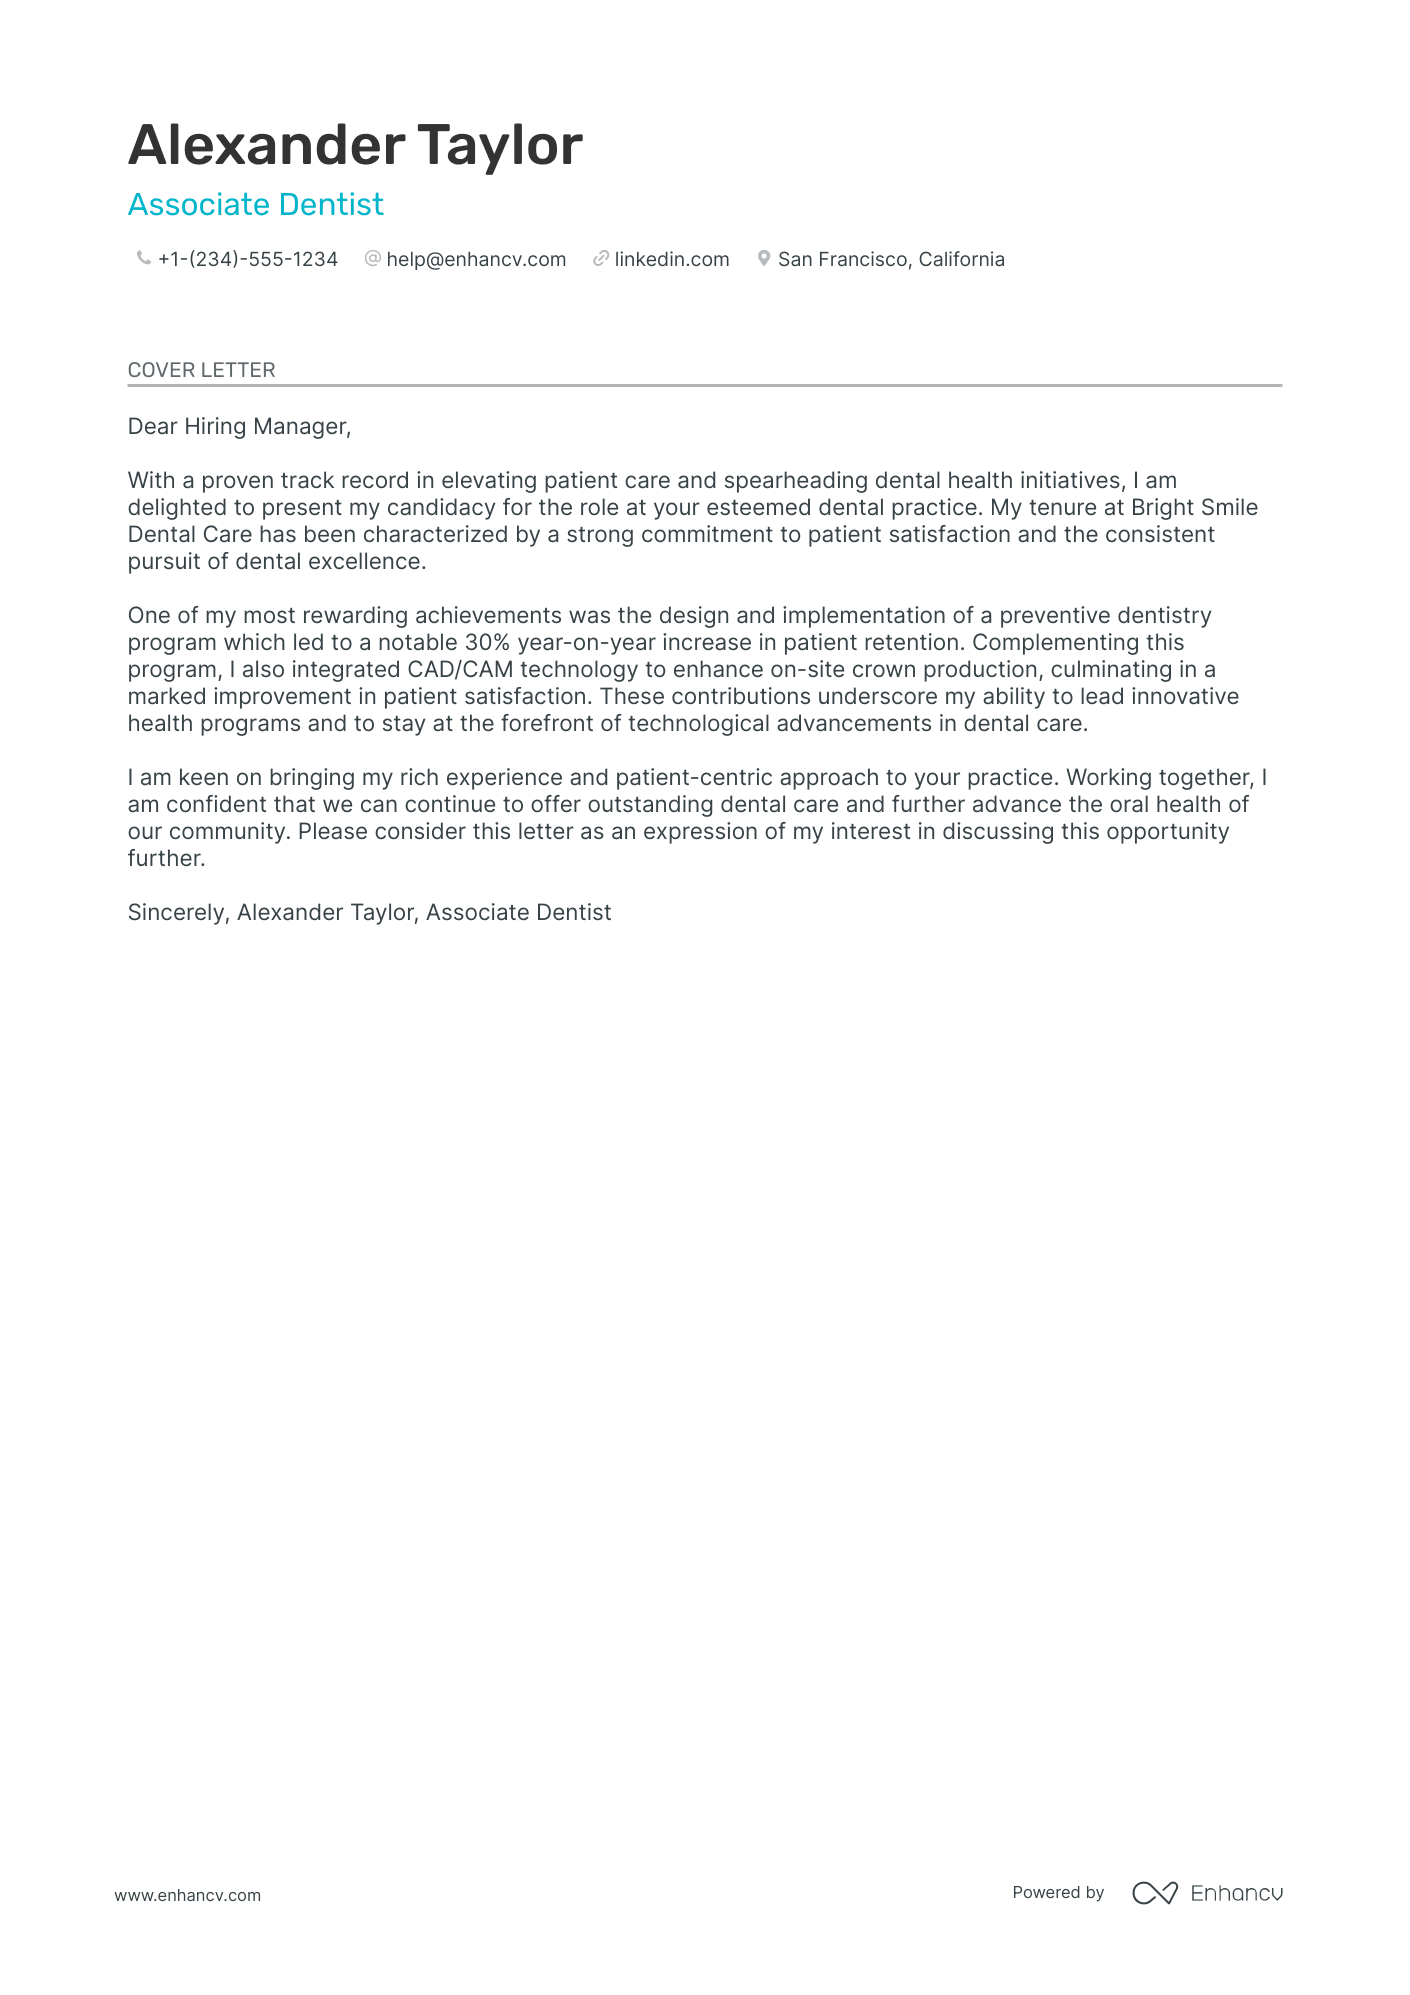 sample cover letter for dentist with no experience